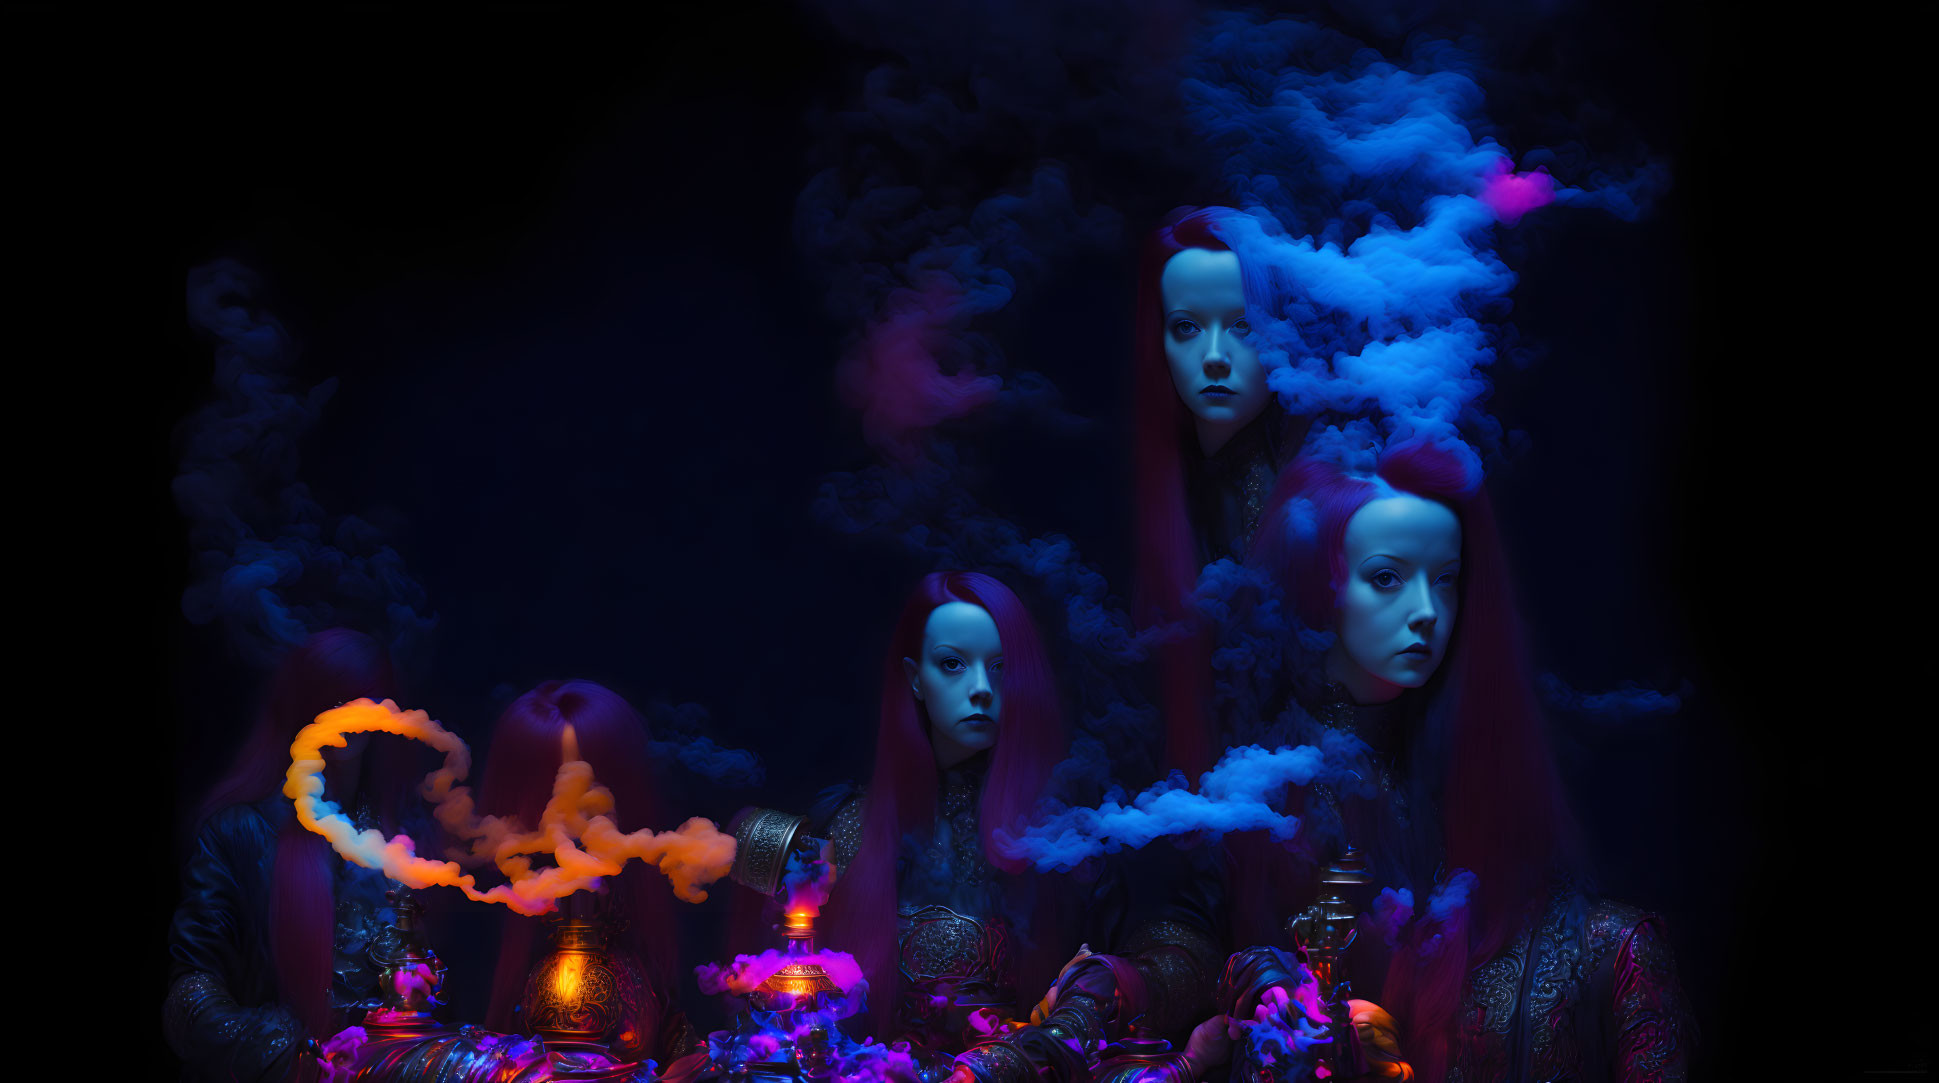 Redheaded figures in blue and orange smoke with candle and scattered items on a table